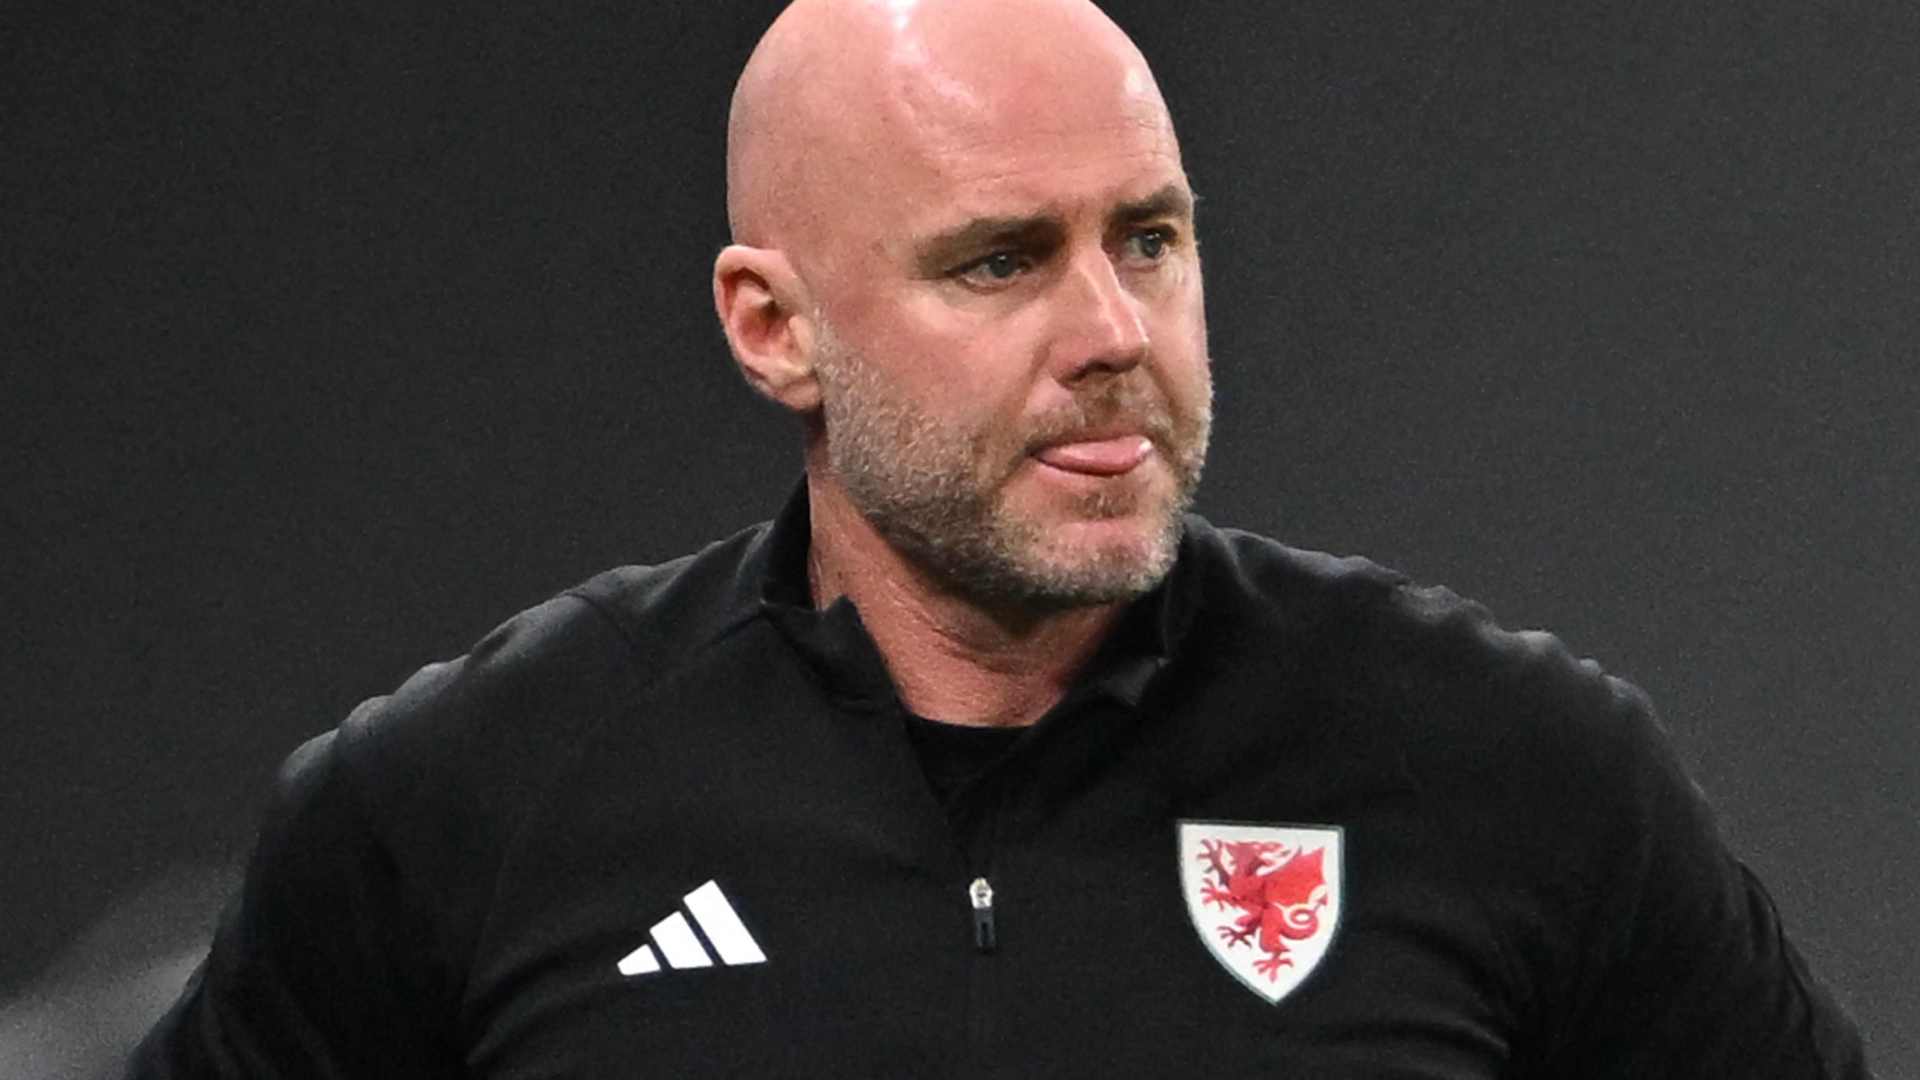 Wales SACK Rob Page as manager after missing out on Euro 2024 as they release statement [Video]